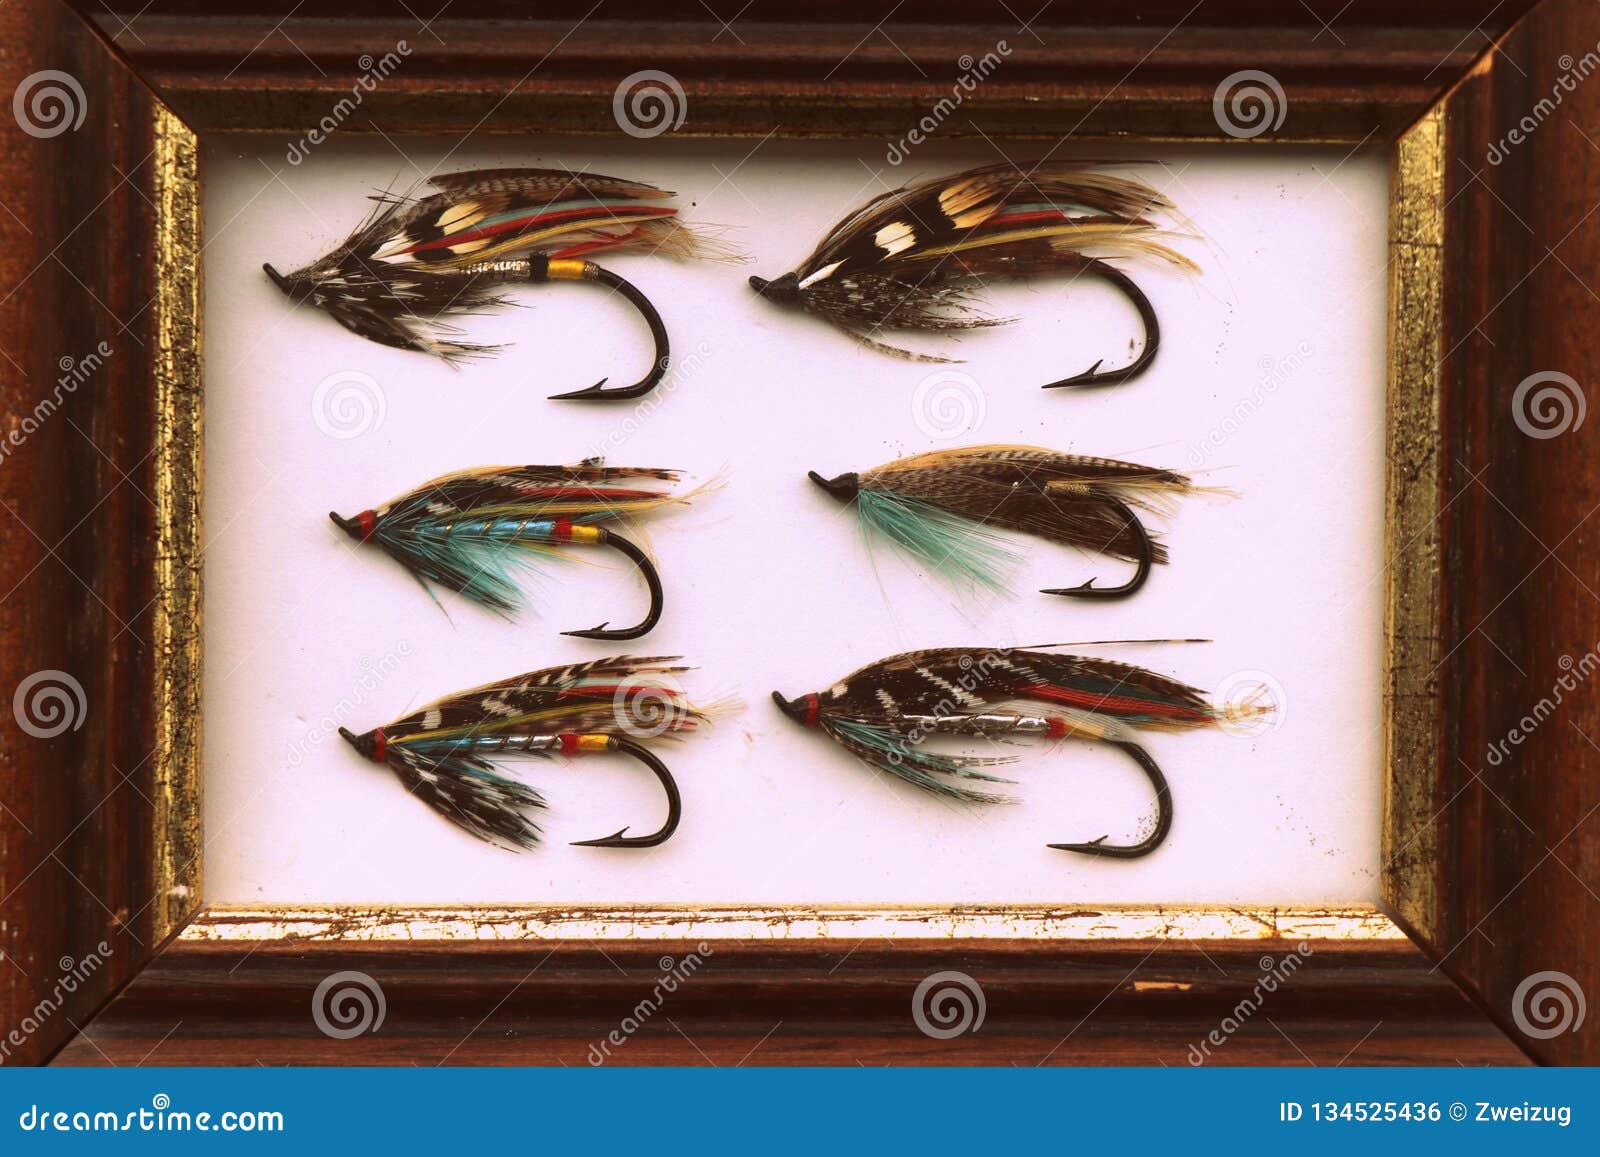 Vintage Classic Salmon Flies Fly Fishing Picture Stock Photo